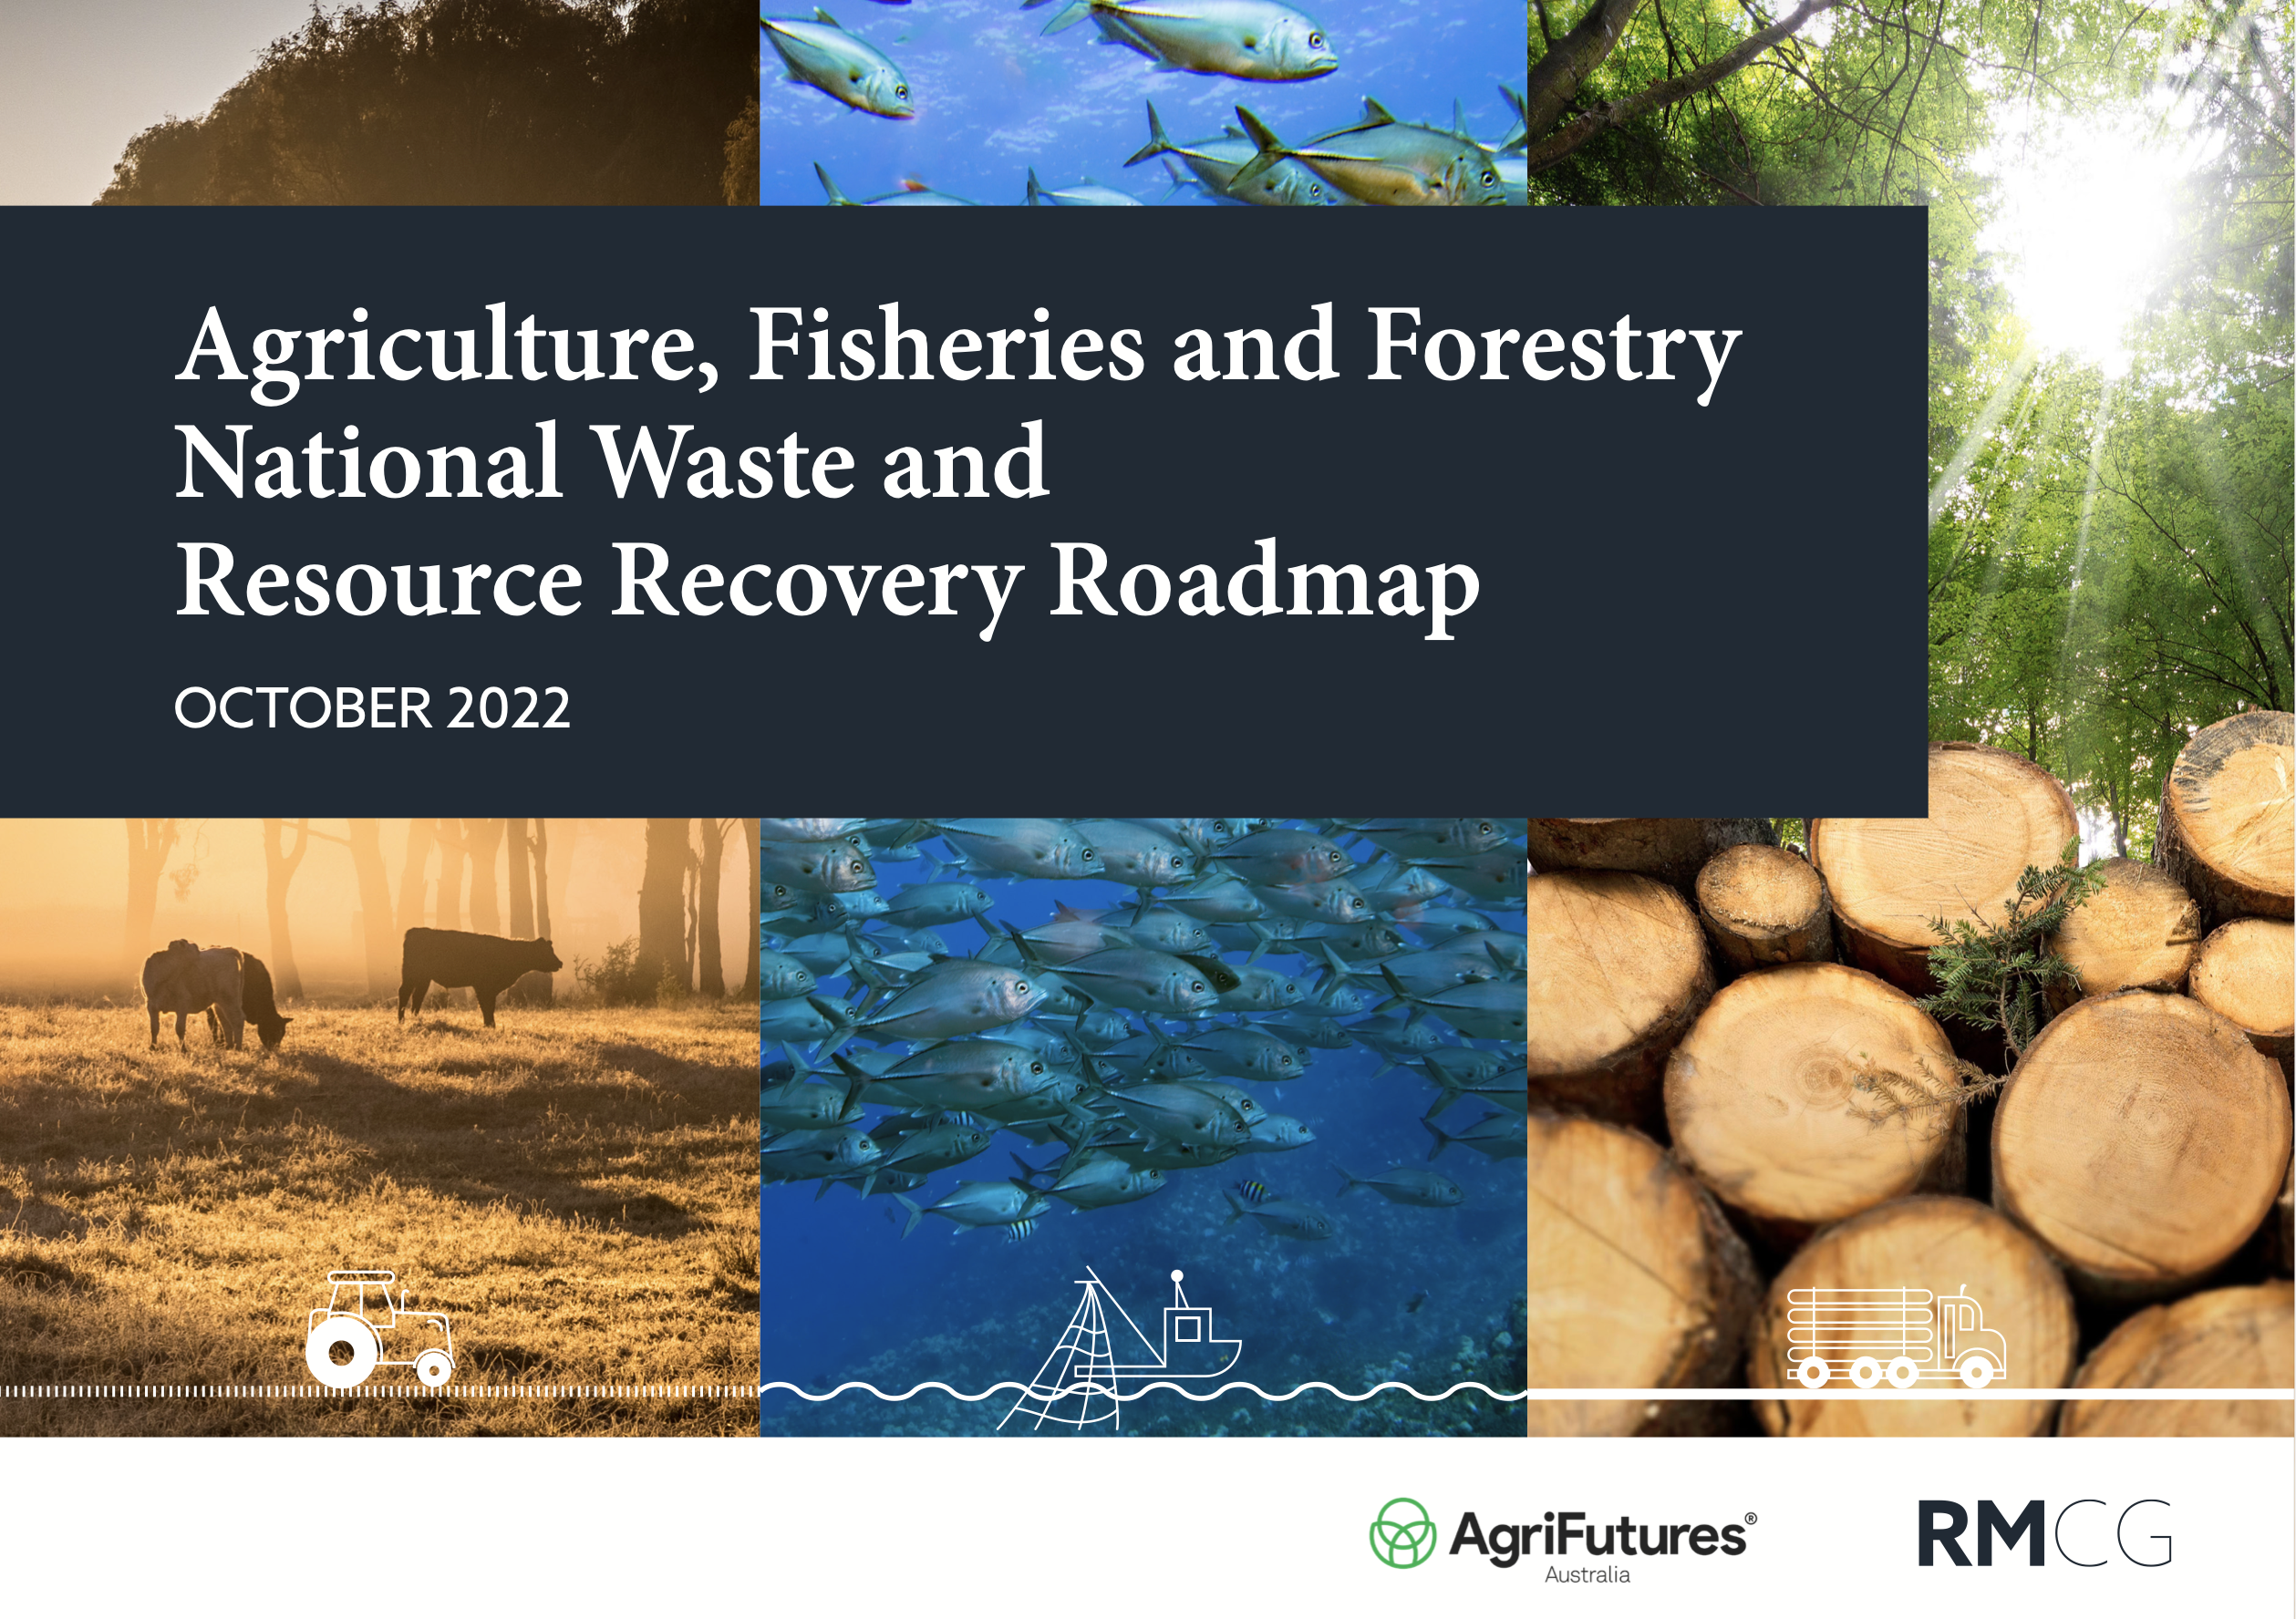 Agriculture, Fisheries and Forestry National Waste and Resource Recovery Roadmap